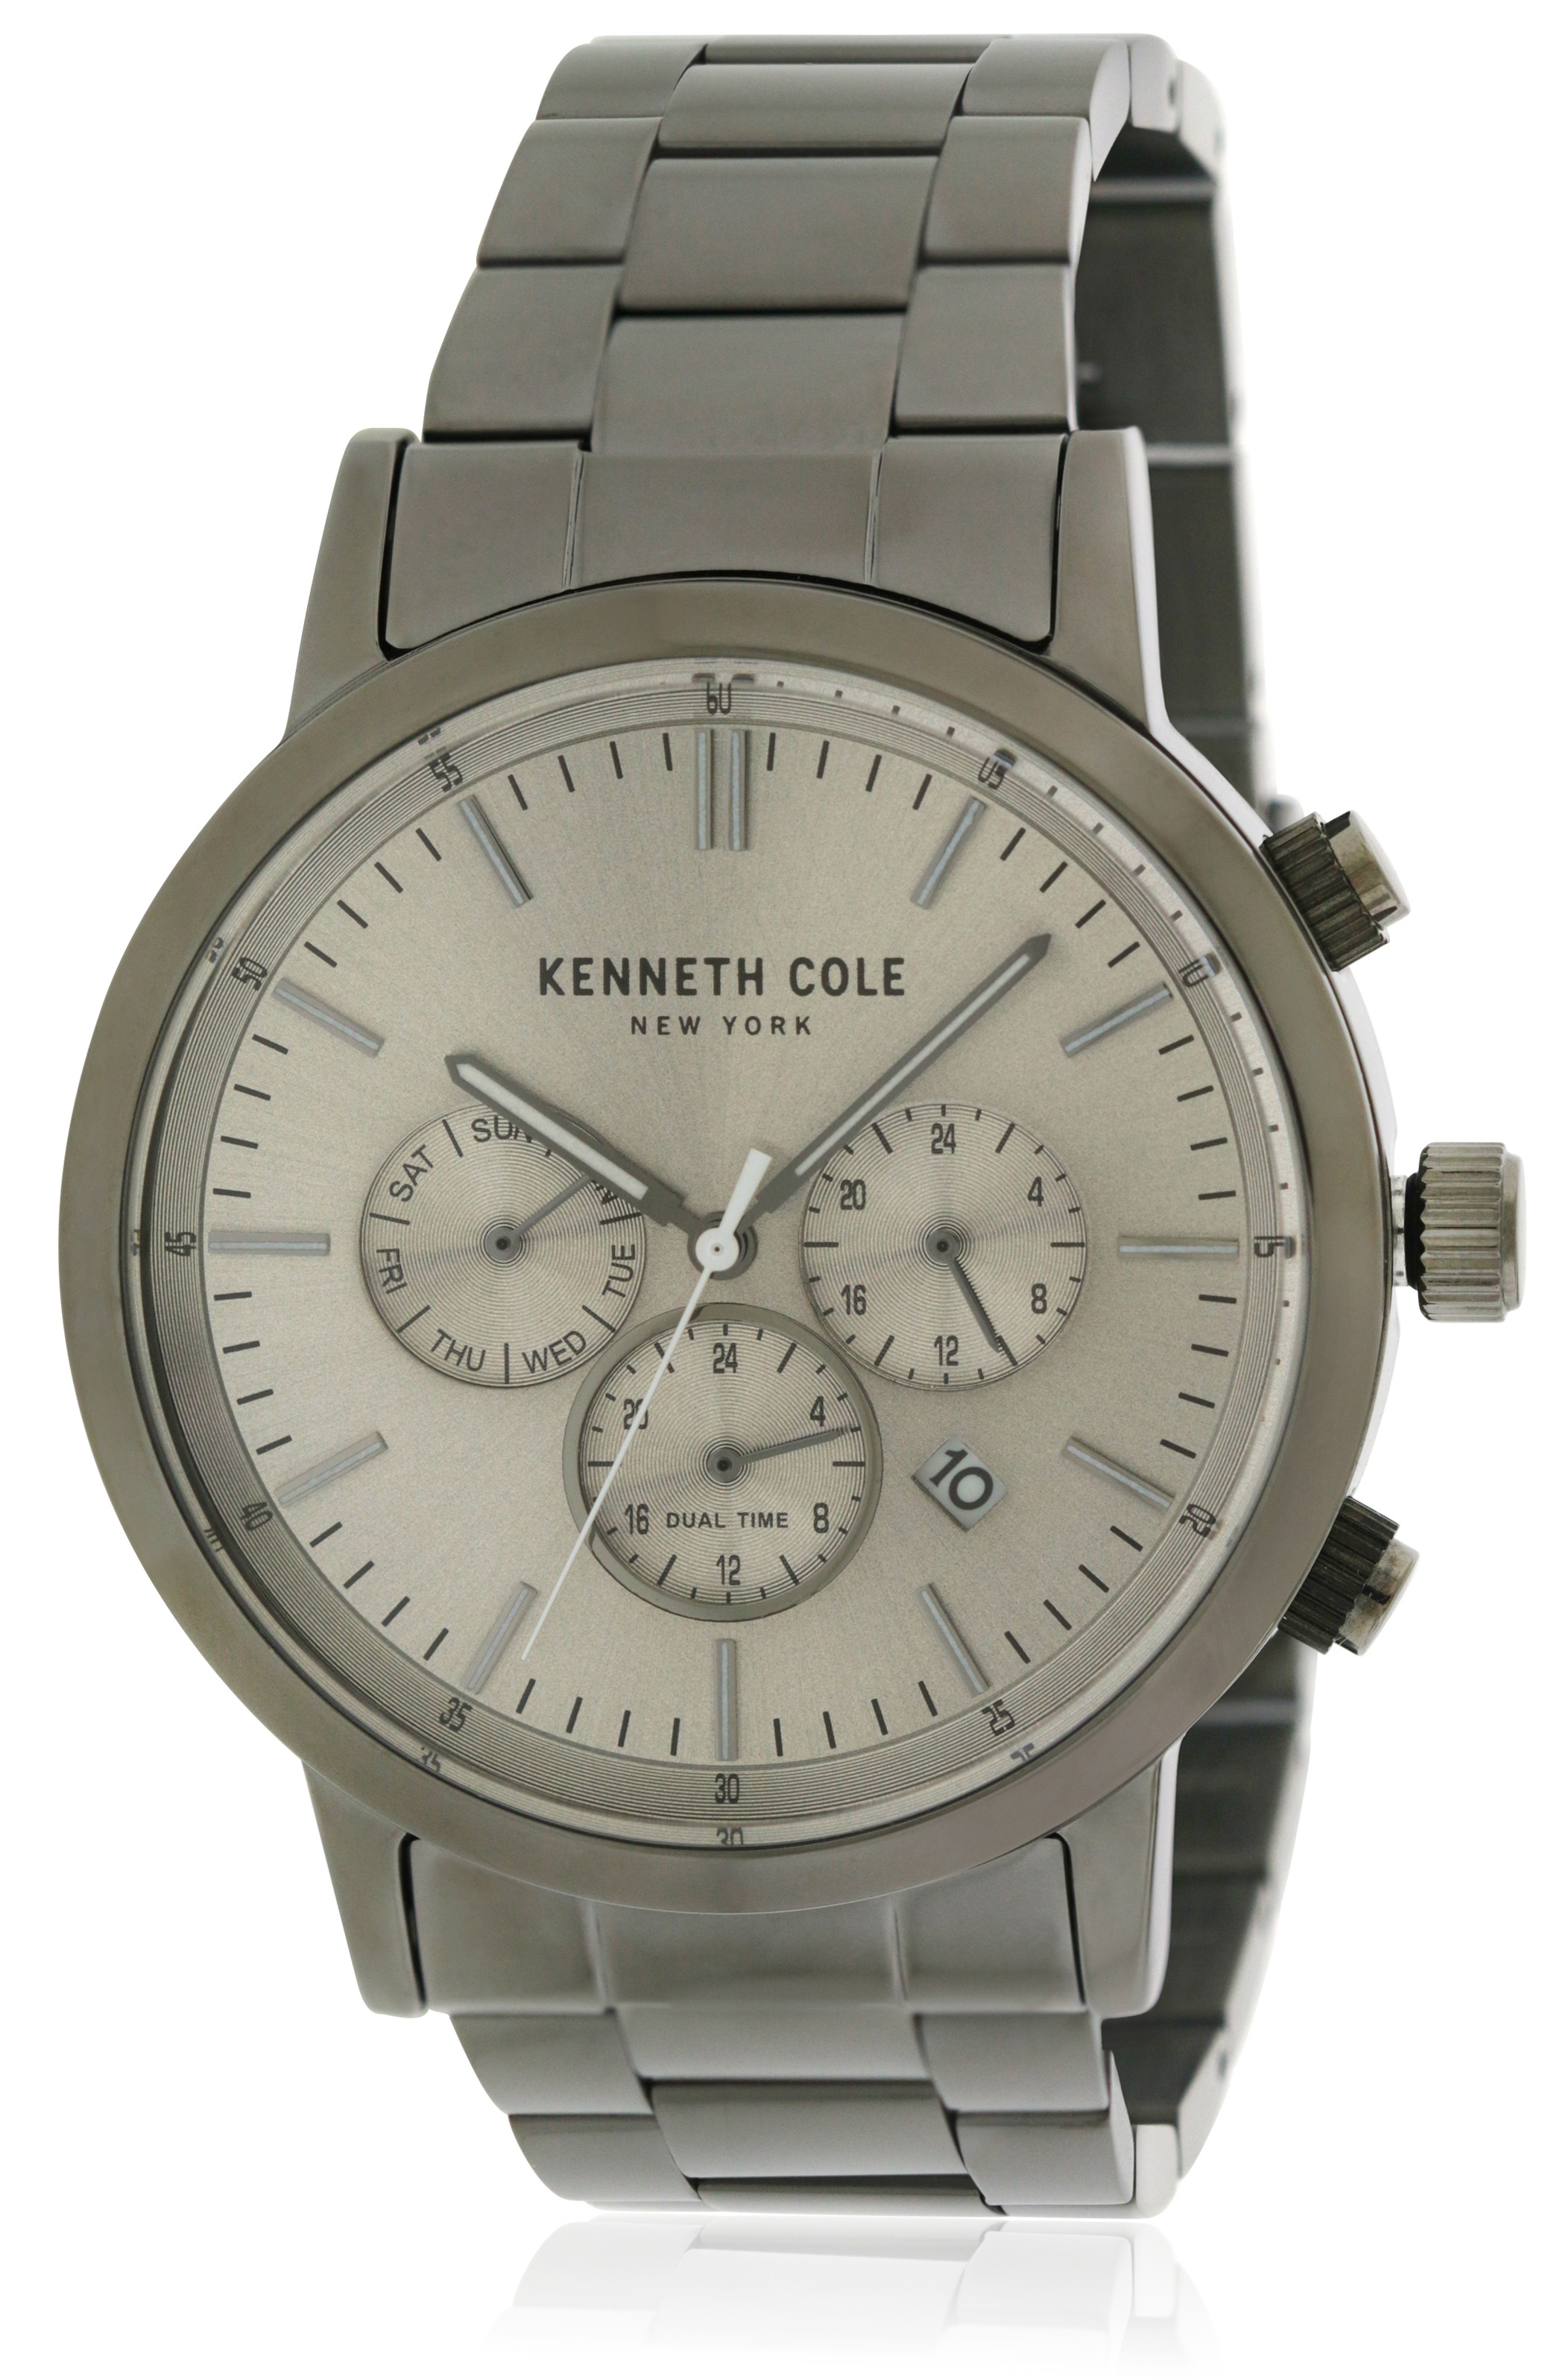 Kenneth Cole Stainless Steel Chronograph Mens Watch KCC0133003 Kenneth Cole Stainless Steel Watch